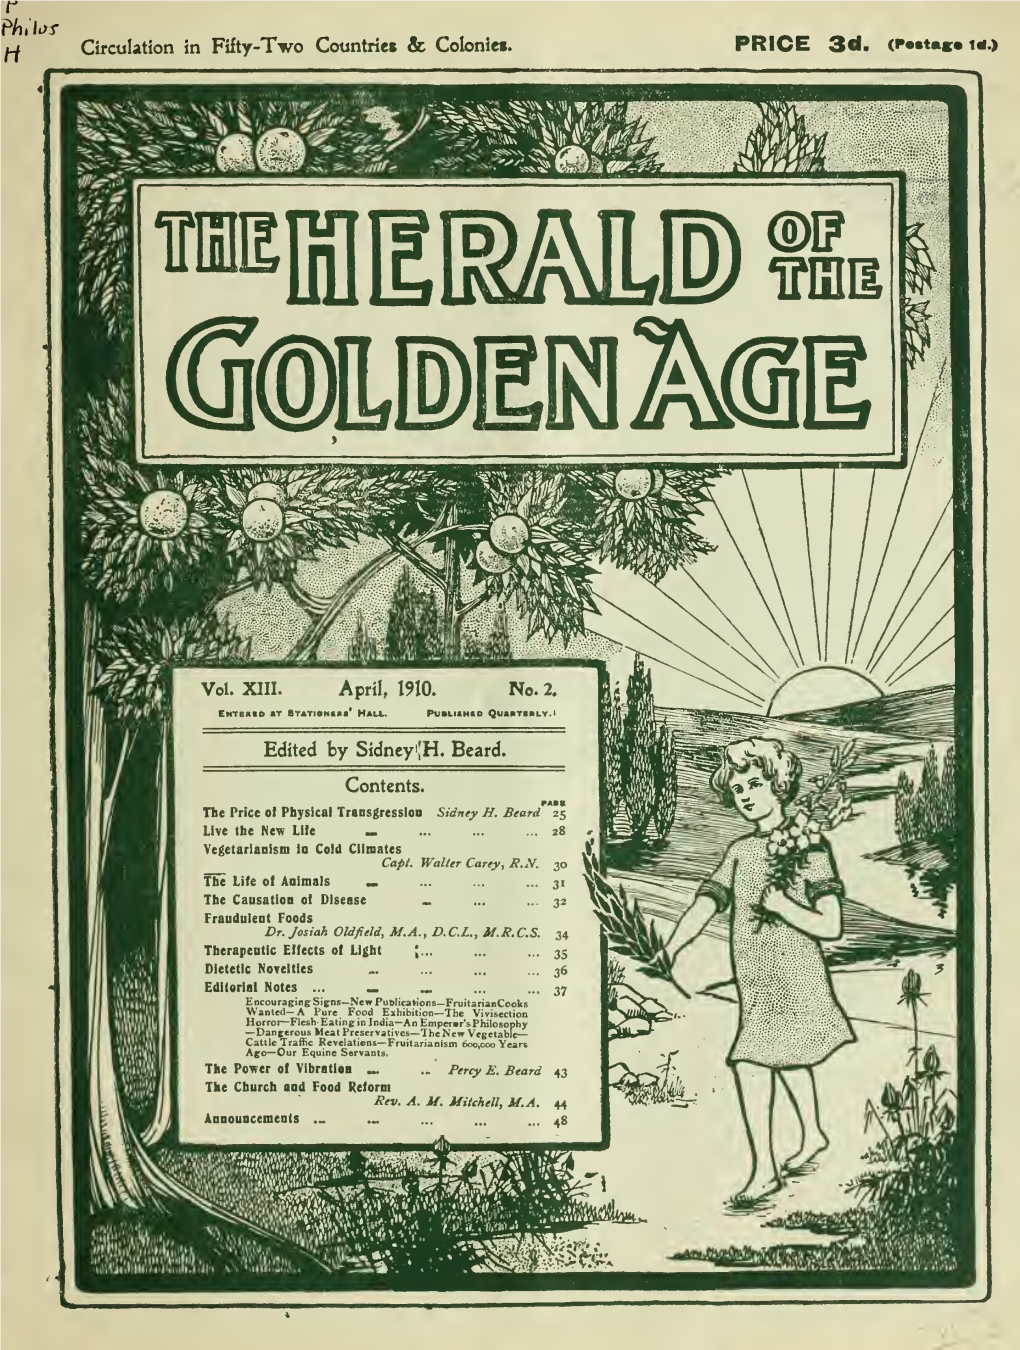 Herald of the Golden Age V13 N2 Apr 1910